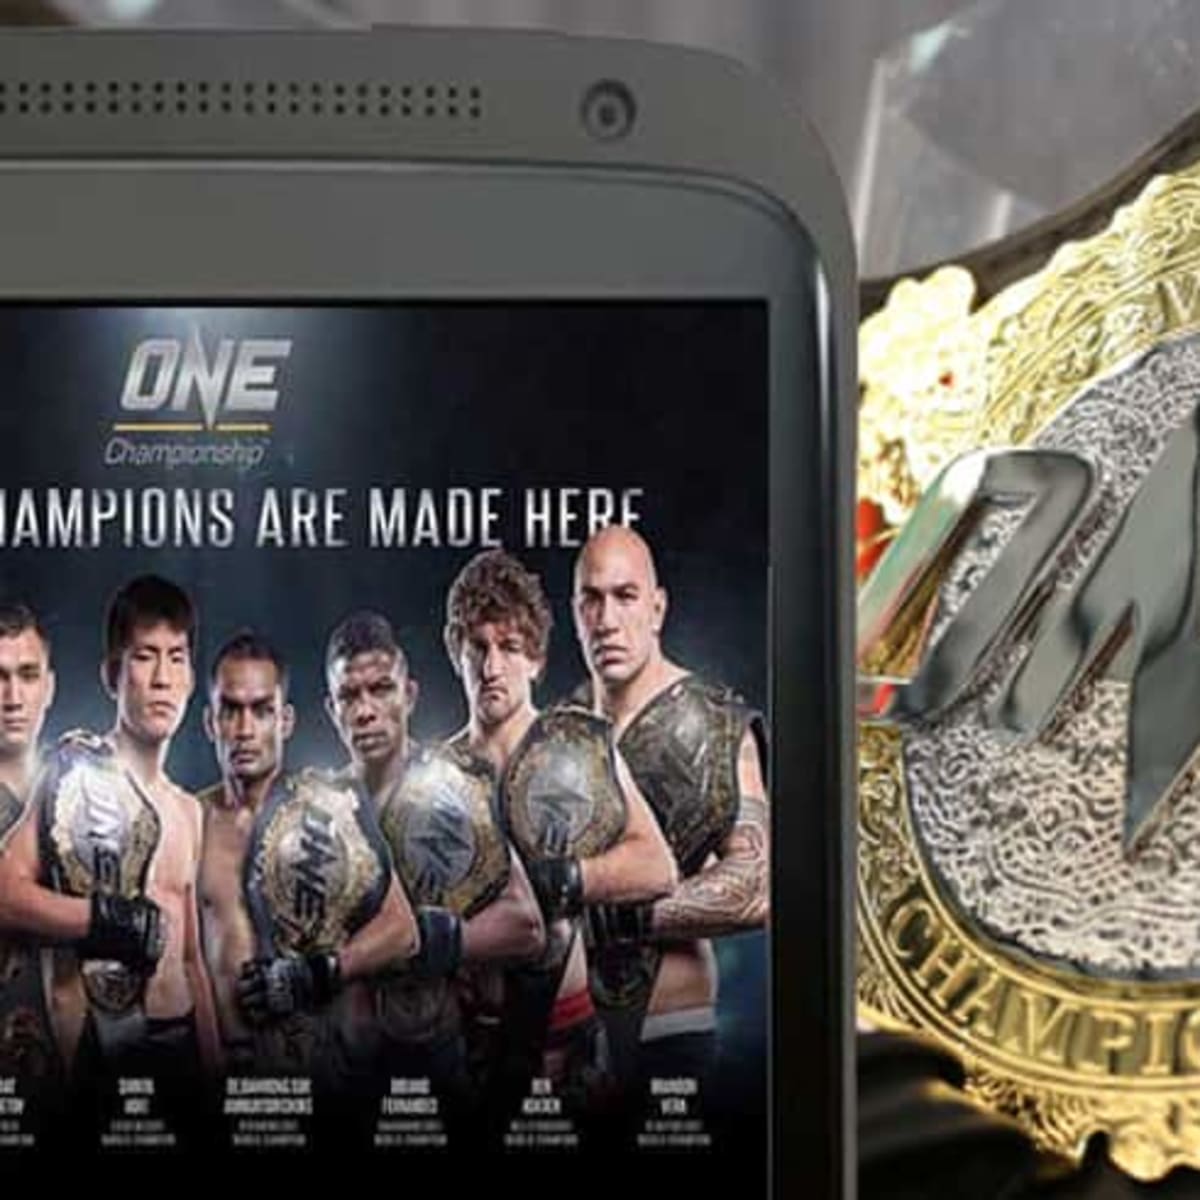 Download ONE Championship app Watch shows live, FREE